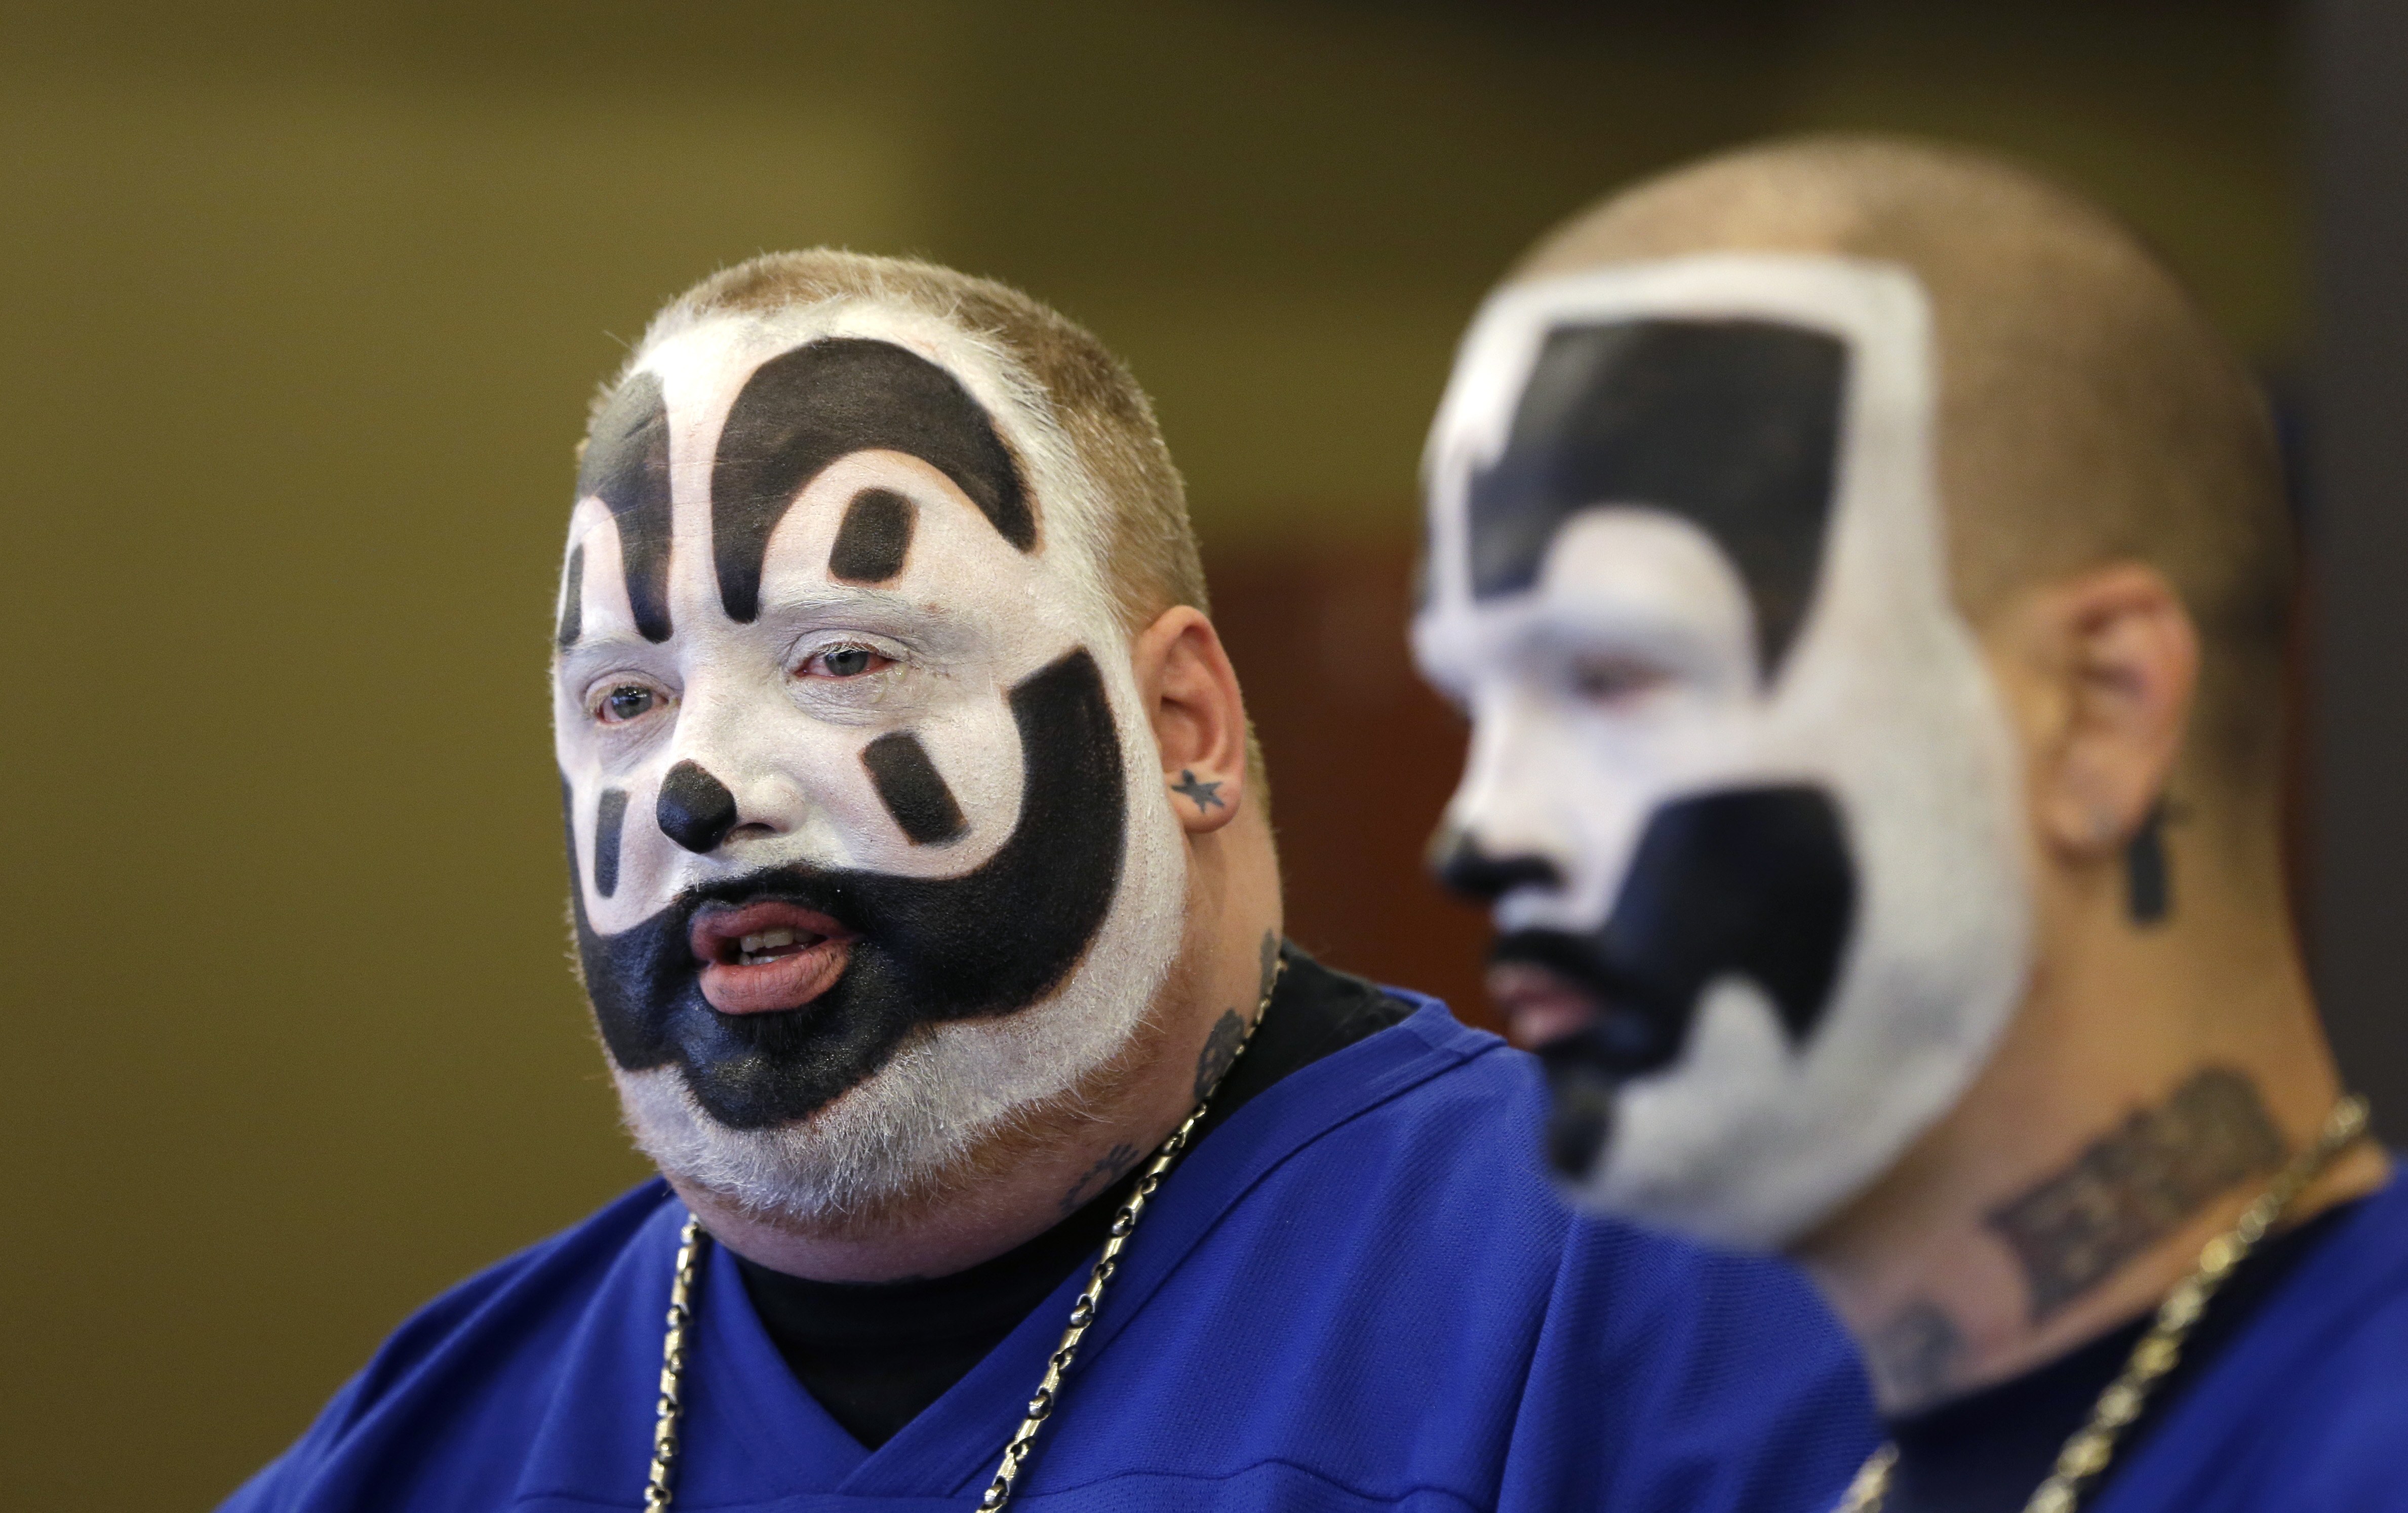 California murder suspect says it wasn't him, points to Juggalo, a fan ...